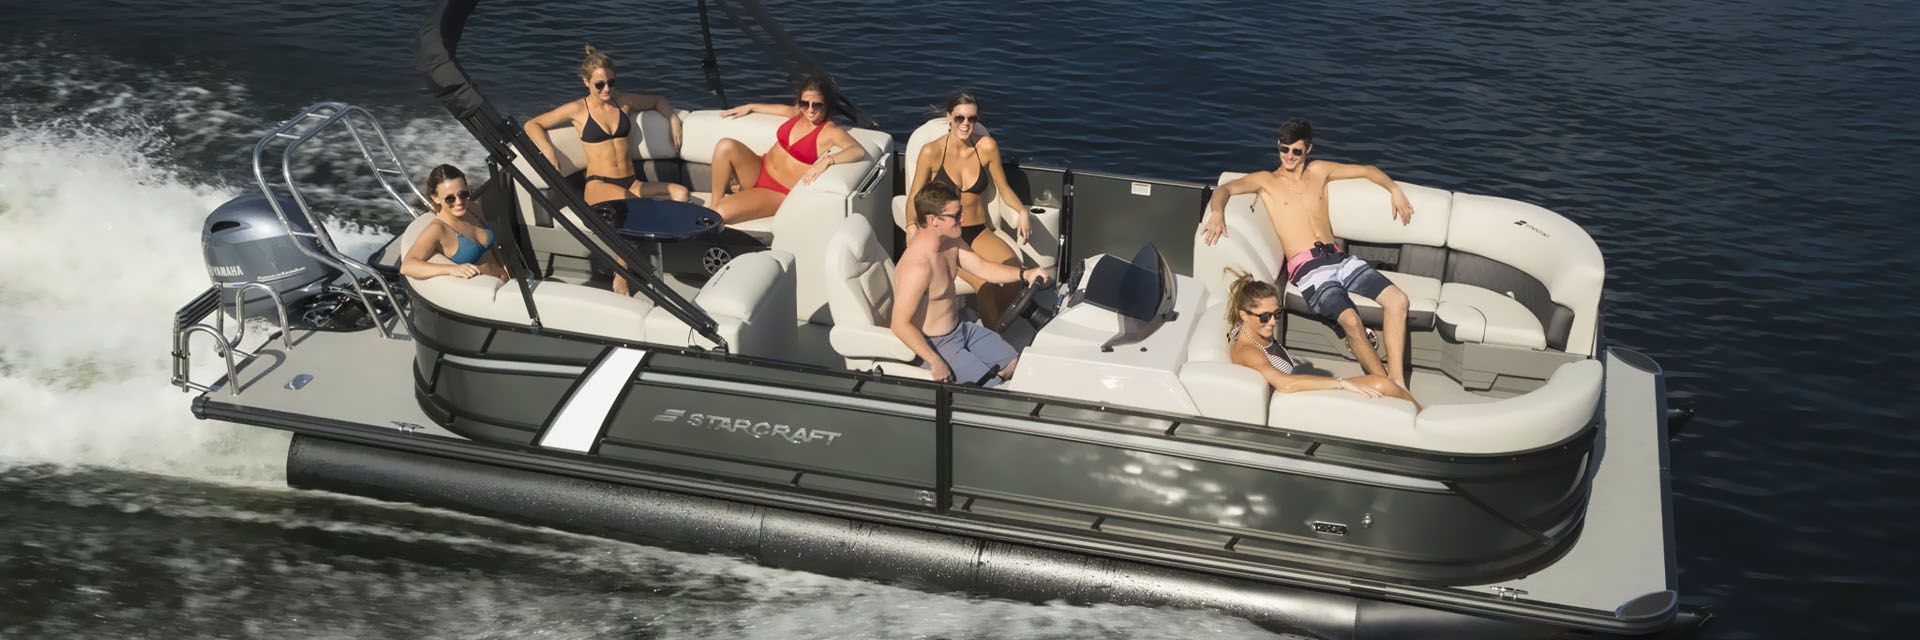 People riding on a Pontoon Boat